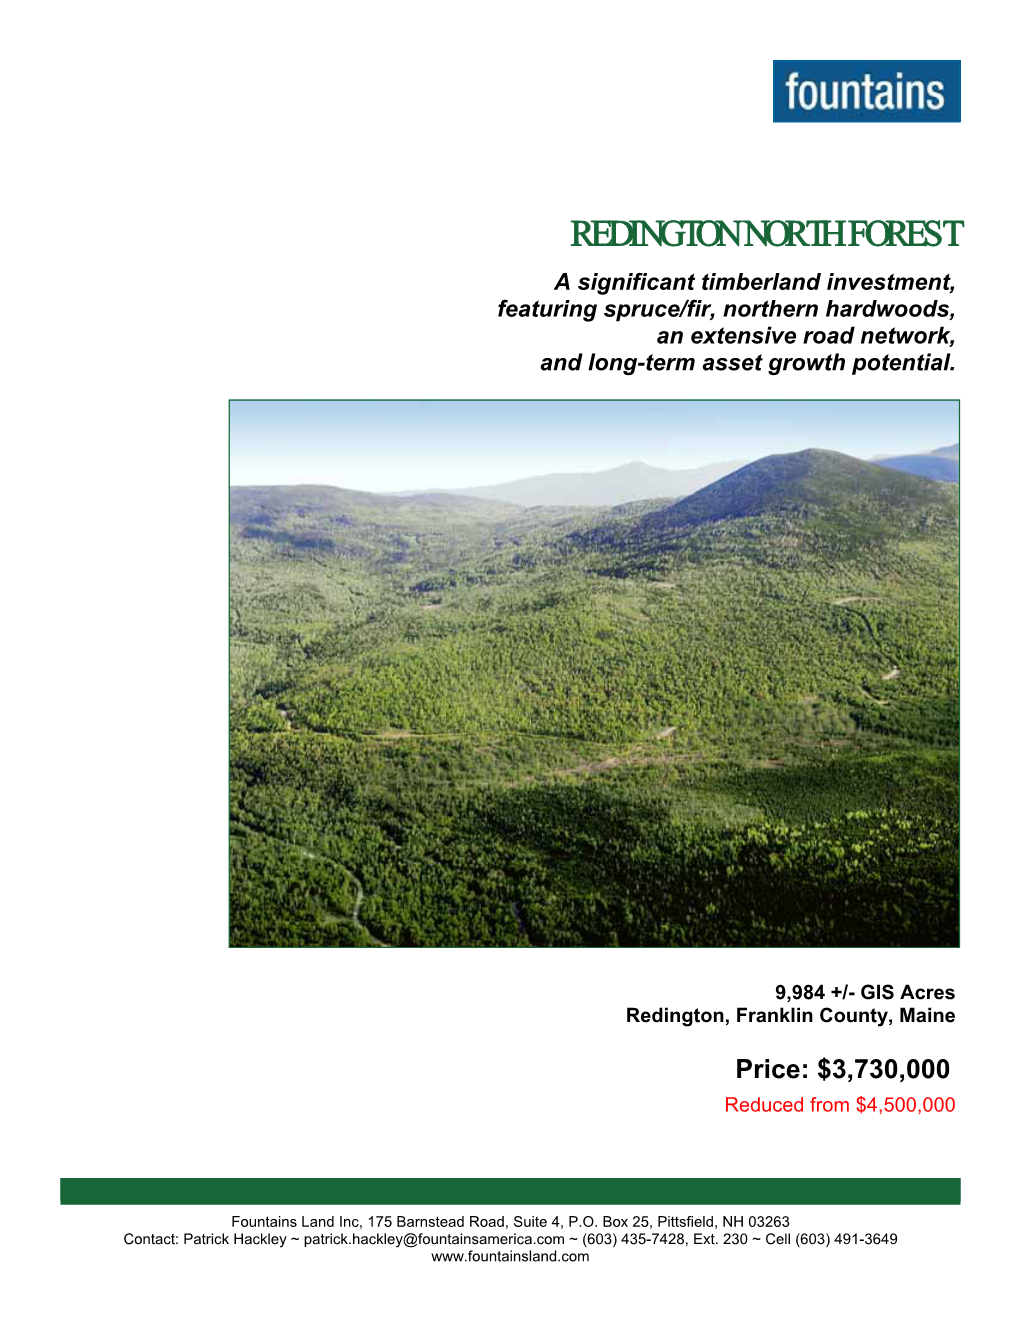 REDINGTON NORTH FOREST a Significant Timberland Investment, Featuring Spruce/Fir, Northern Hardwoods, an Extensive Road Network, and Long-Term Asset Growth Potential